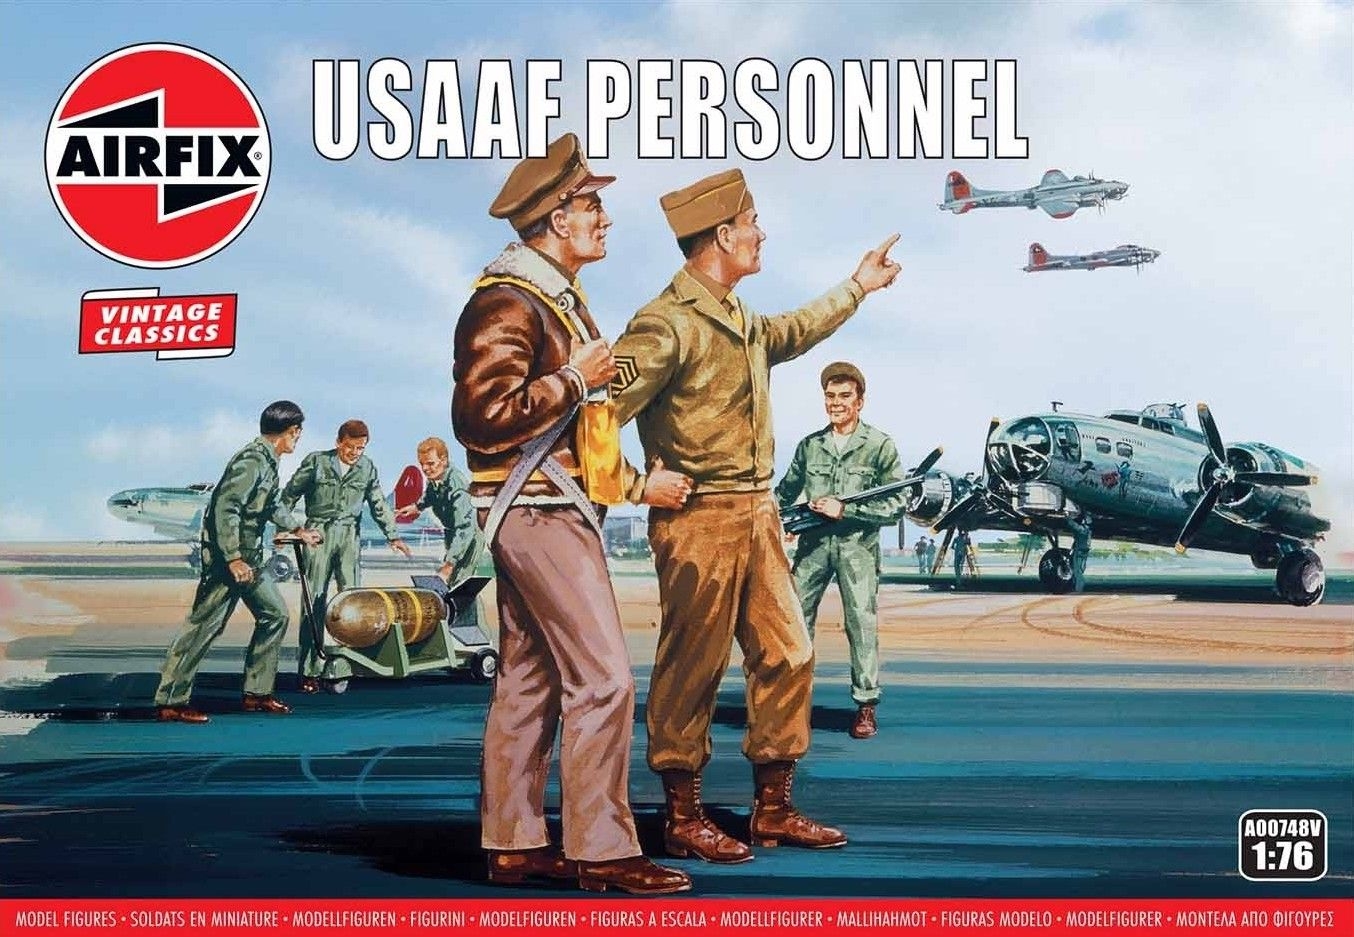 Airfix Vintage Classic 1/76 USAAF Personnel WWII – # A00748V – Model Hobbies